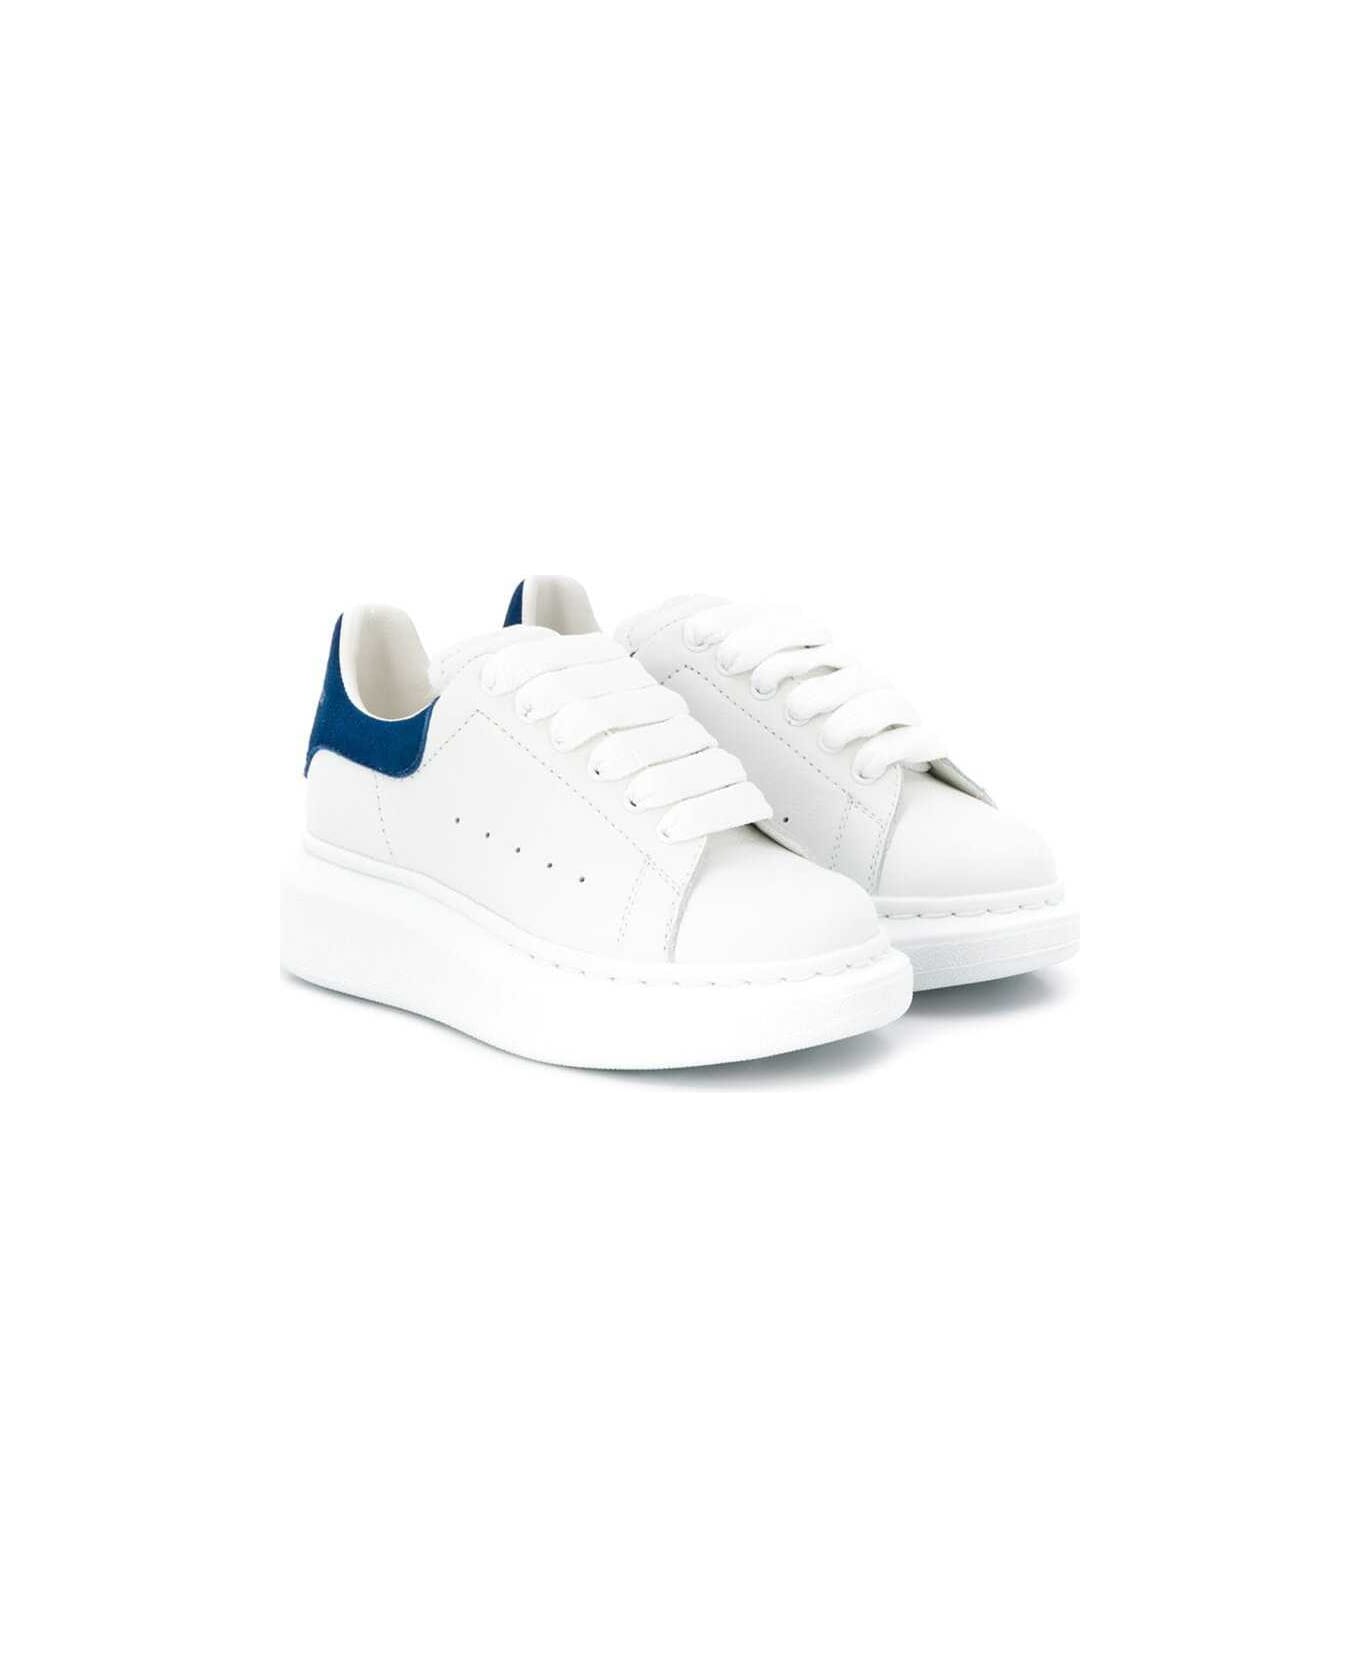 Alexander McQueen Kids Boy's White Leather Oversize Sneakers With Blue Heel Tab - White